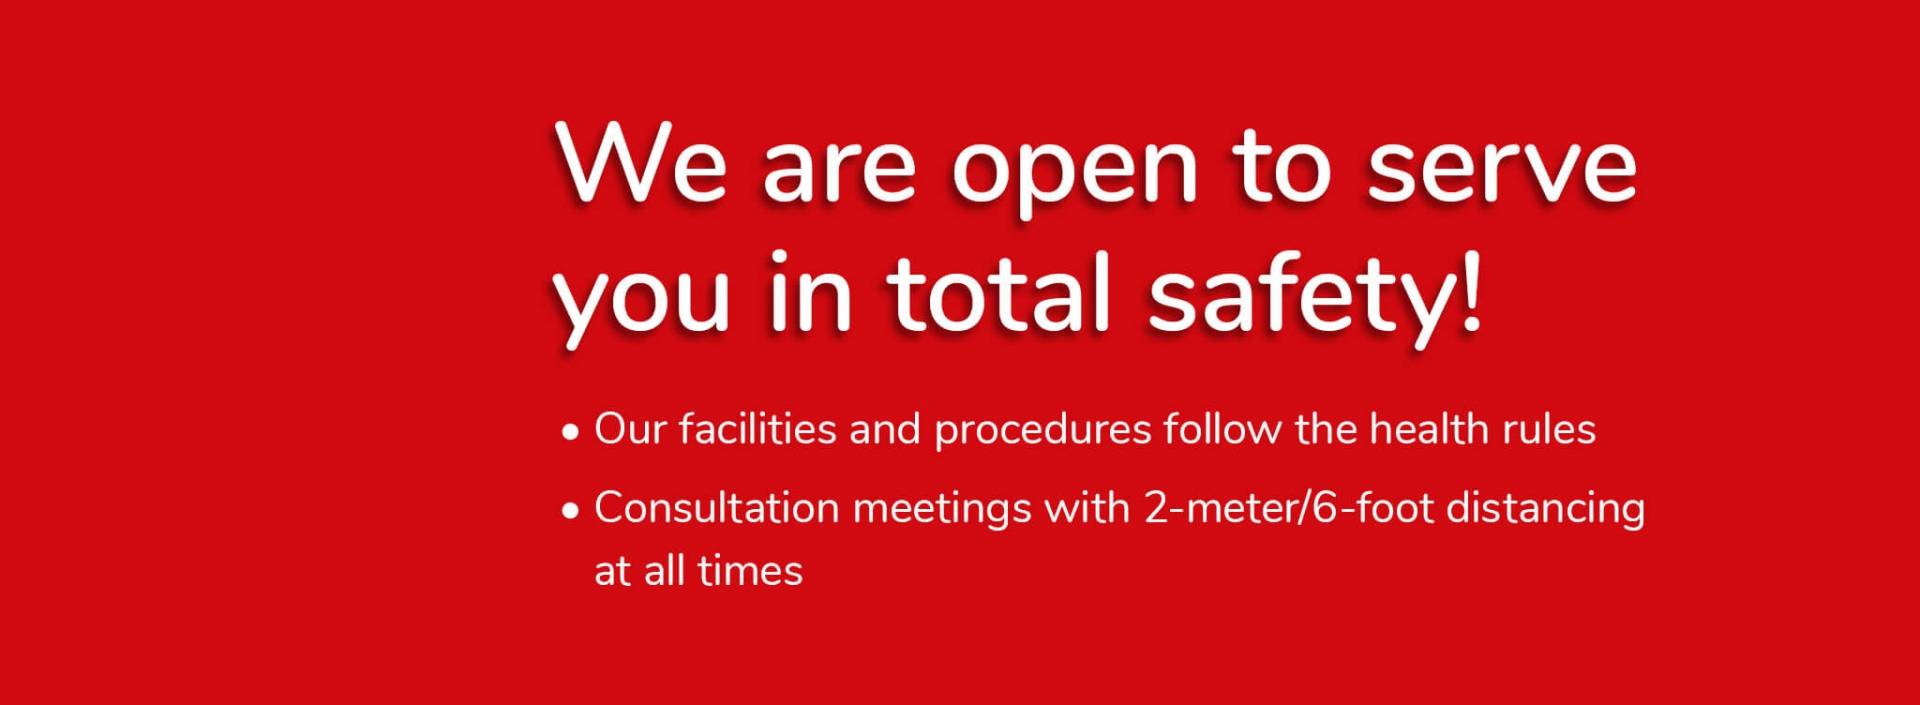 We are open to serve you in total safety